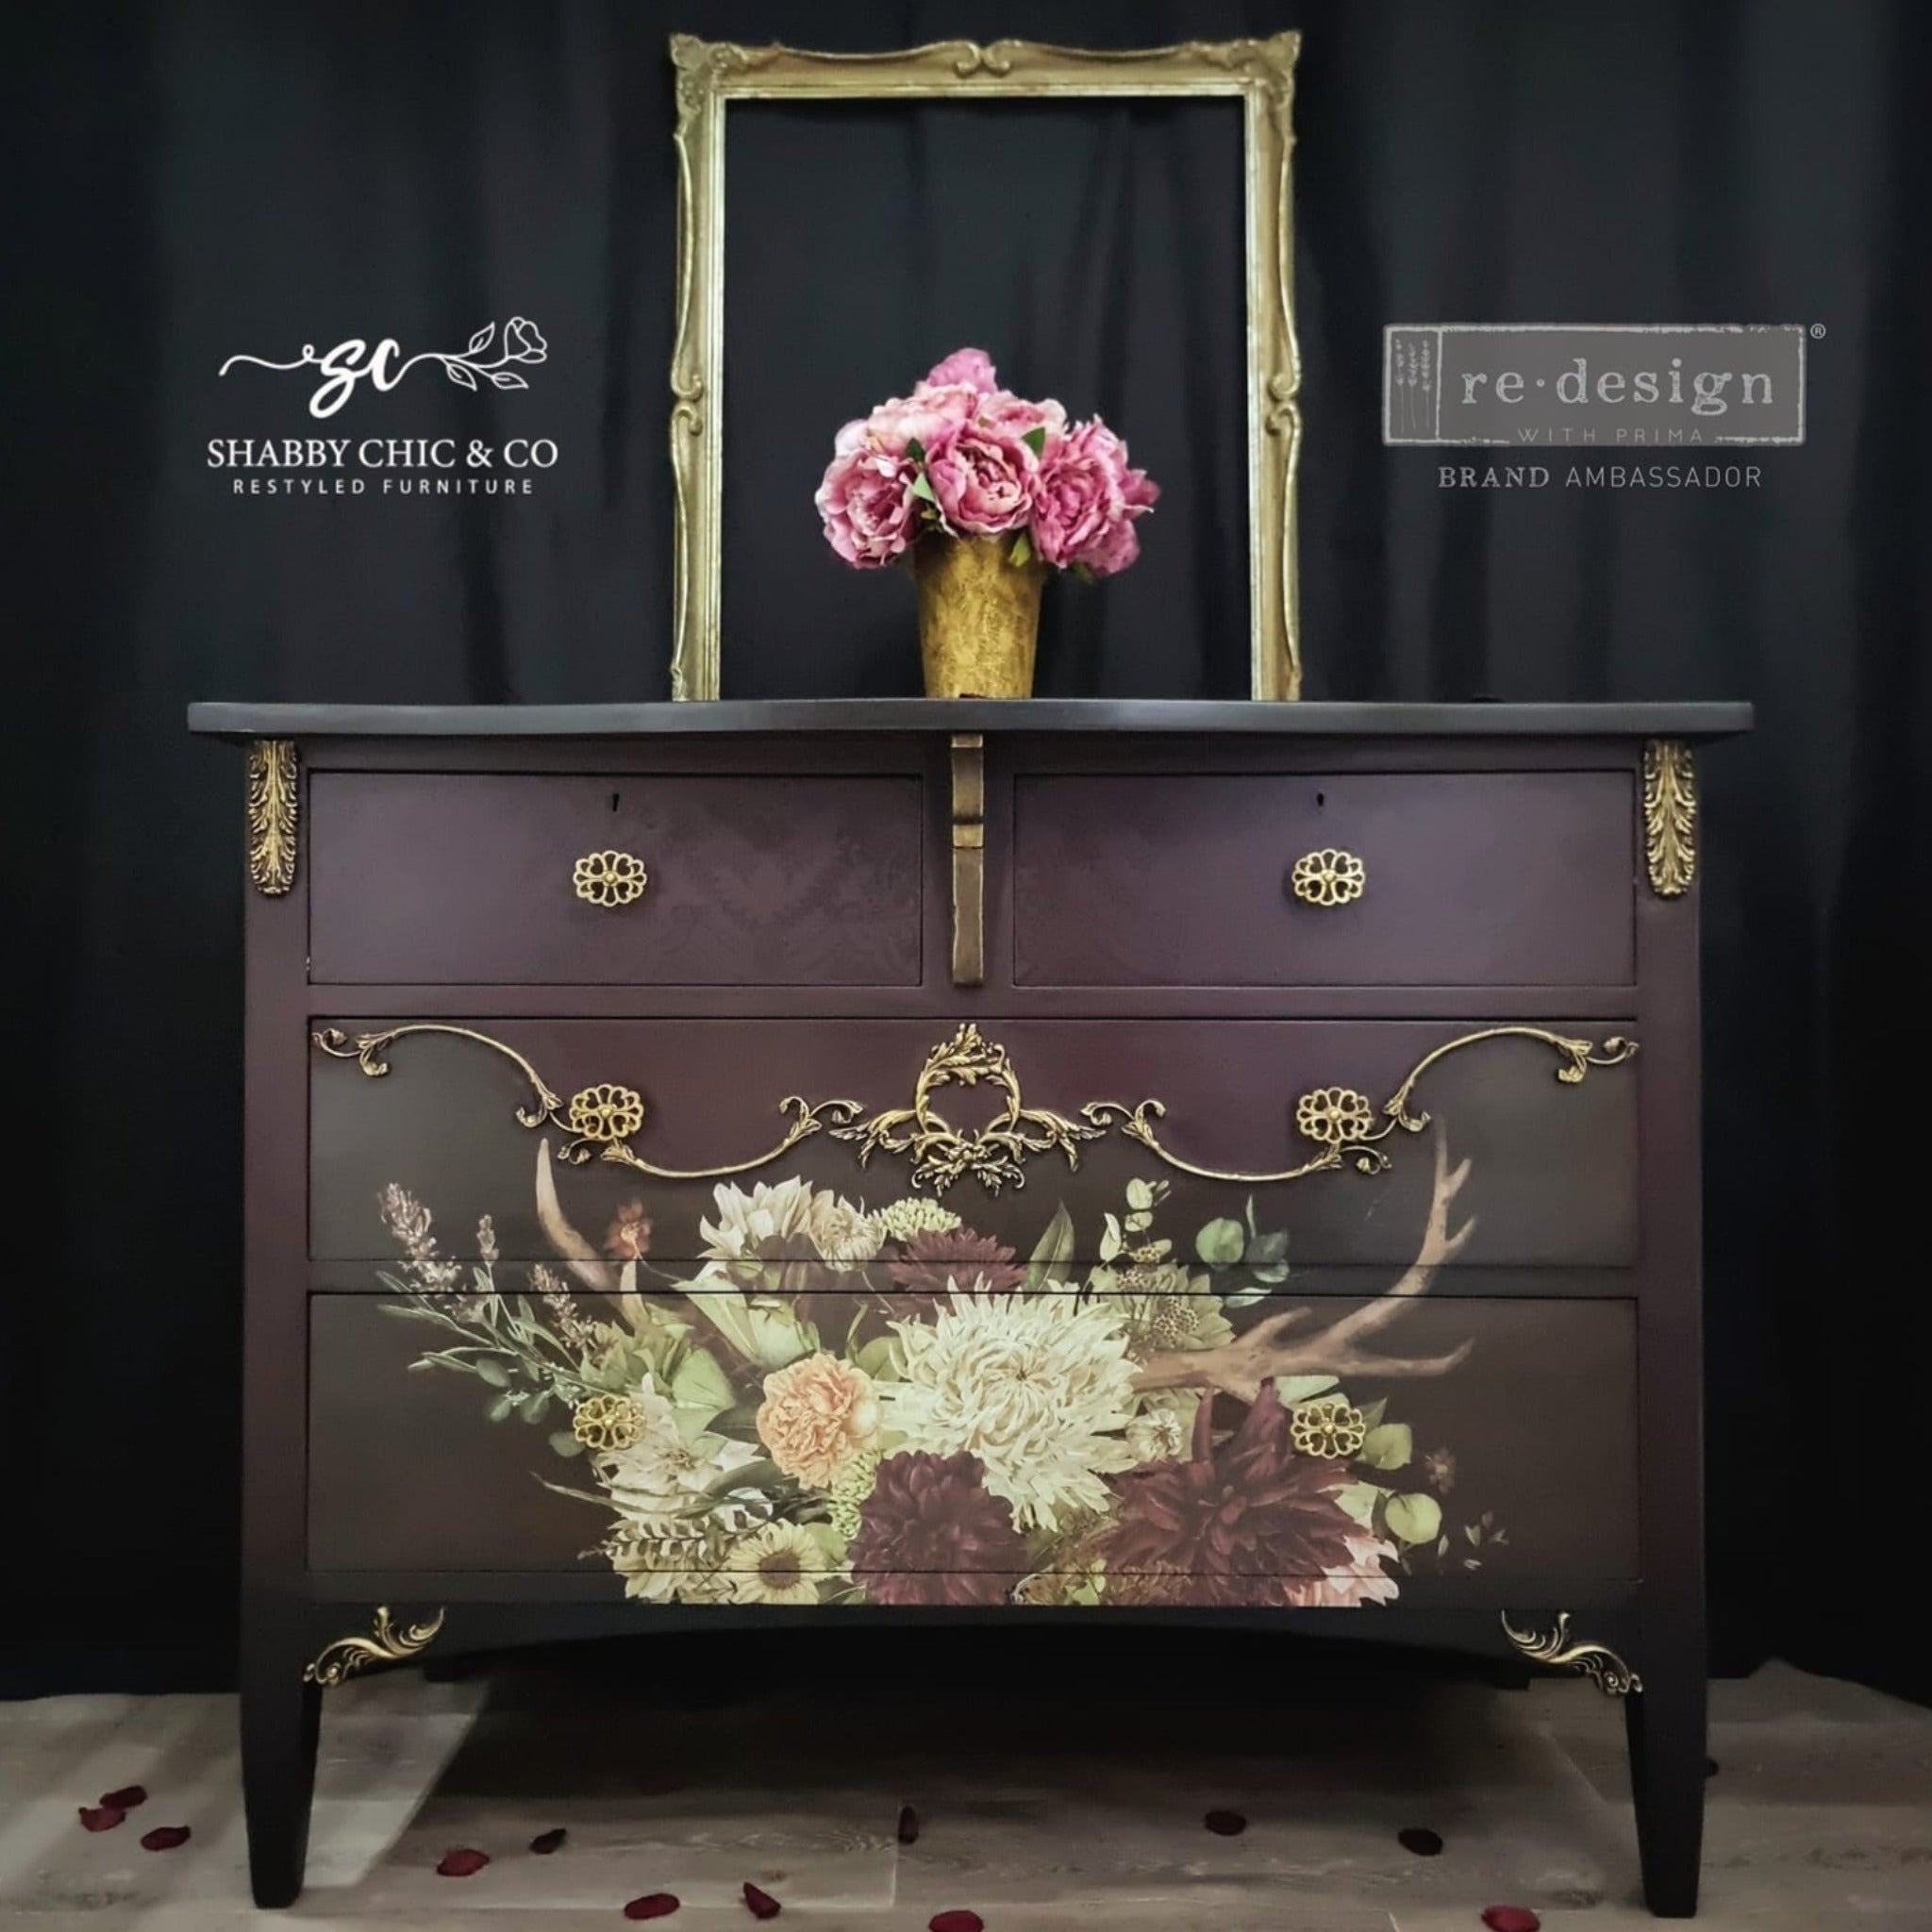 A 4 drawer dresser refurbished by Shabby Chic & Co. is painted a dark black cherry with gold accents and features ReDesign with Prima's Prairie House 12"x12" transfer on the bottom 2 large drawers.